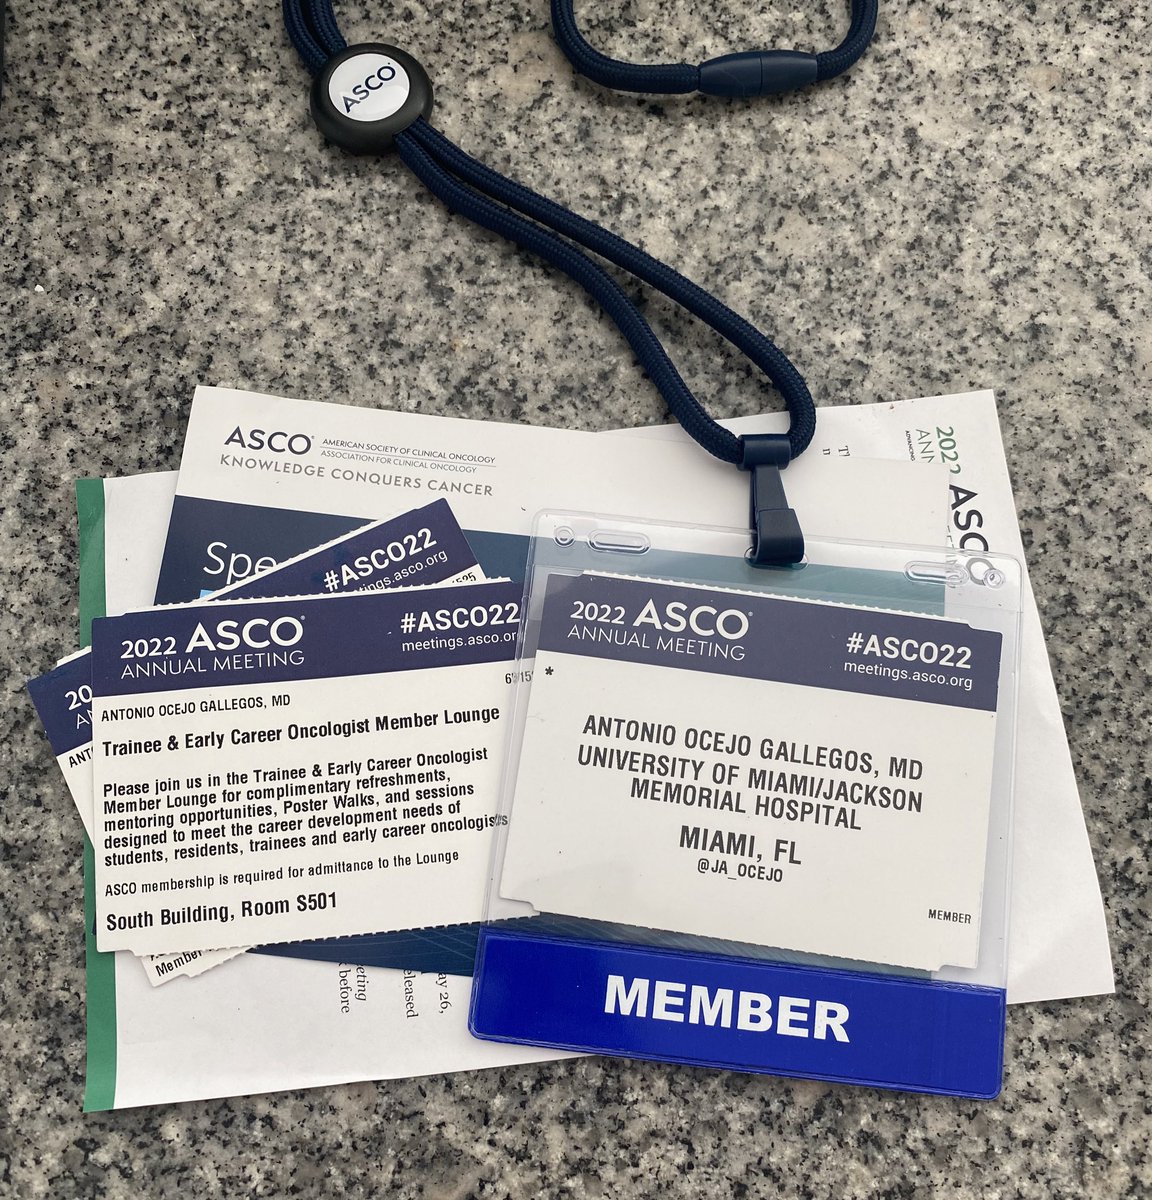 Can’t wait to be in Chicago for my first in-person @ASCO conference! 🤩

A bit overwhelmed but will be sure to tune in today for @HemOncFellows pre-ASCO special. 

#ASCO22 #OncMedEd @LatinxOncology